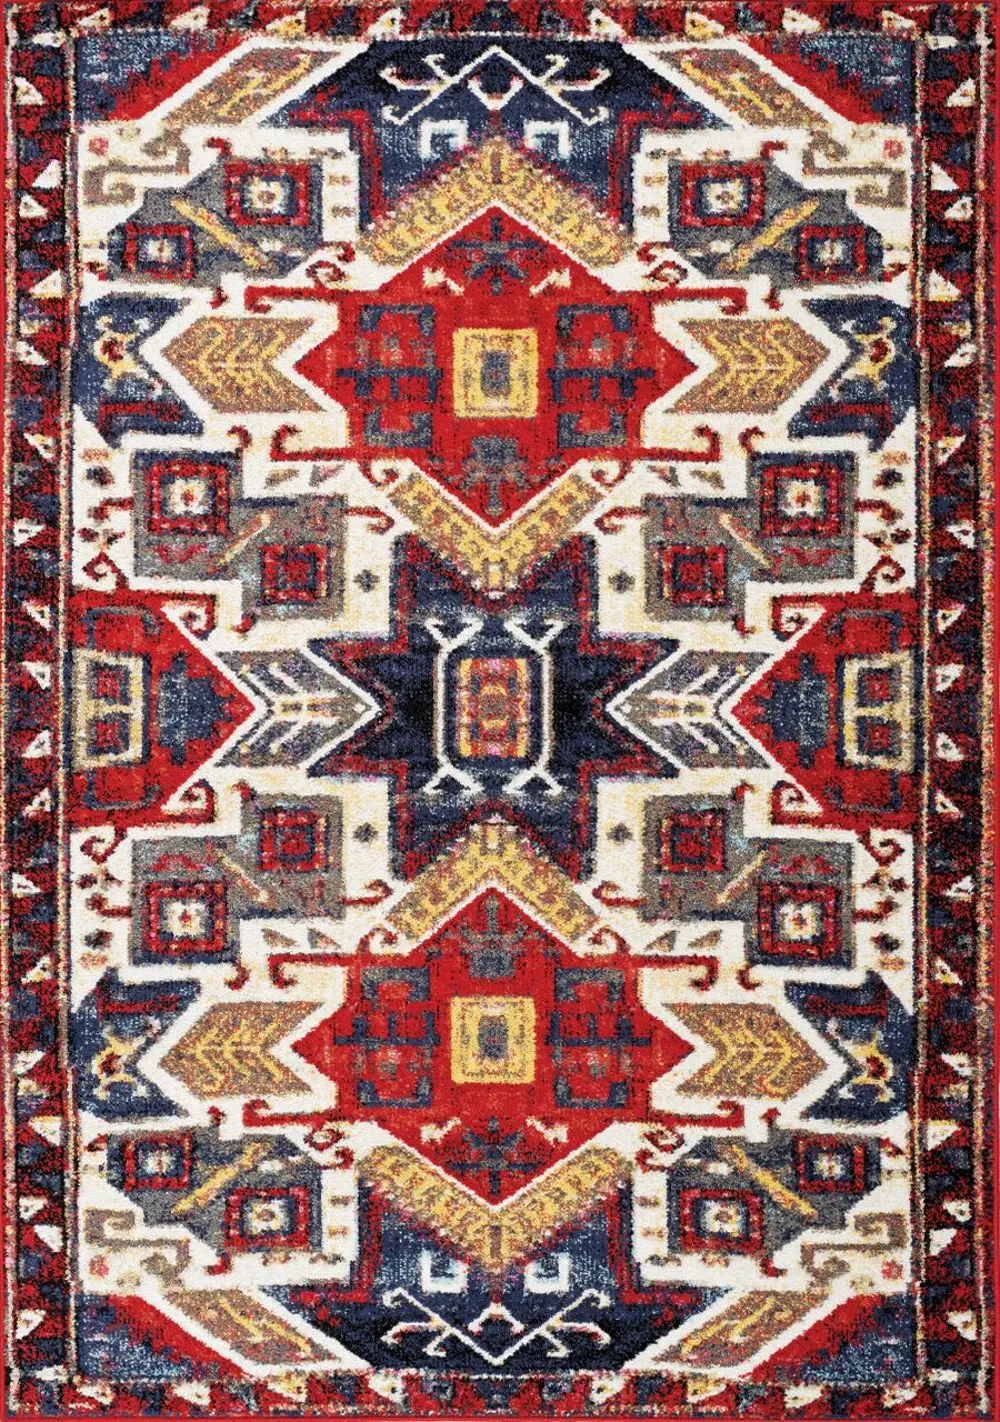 8 x 11 Large Ikat Red, Blue and Cream Area Rug - Saffron-1